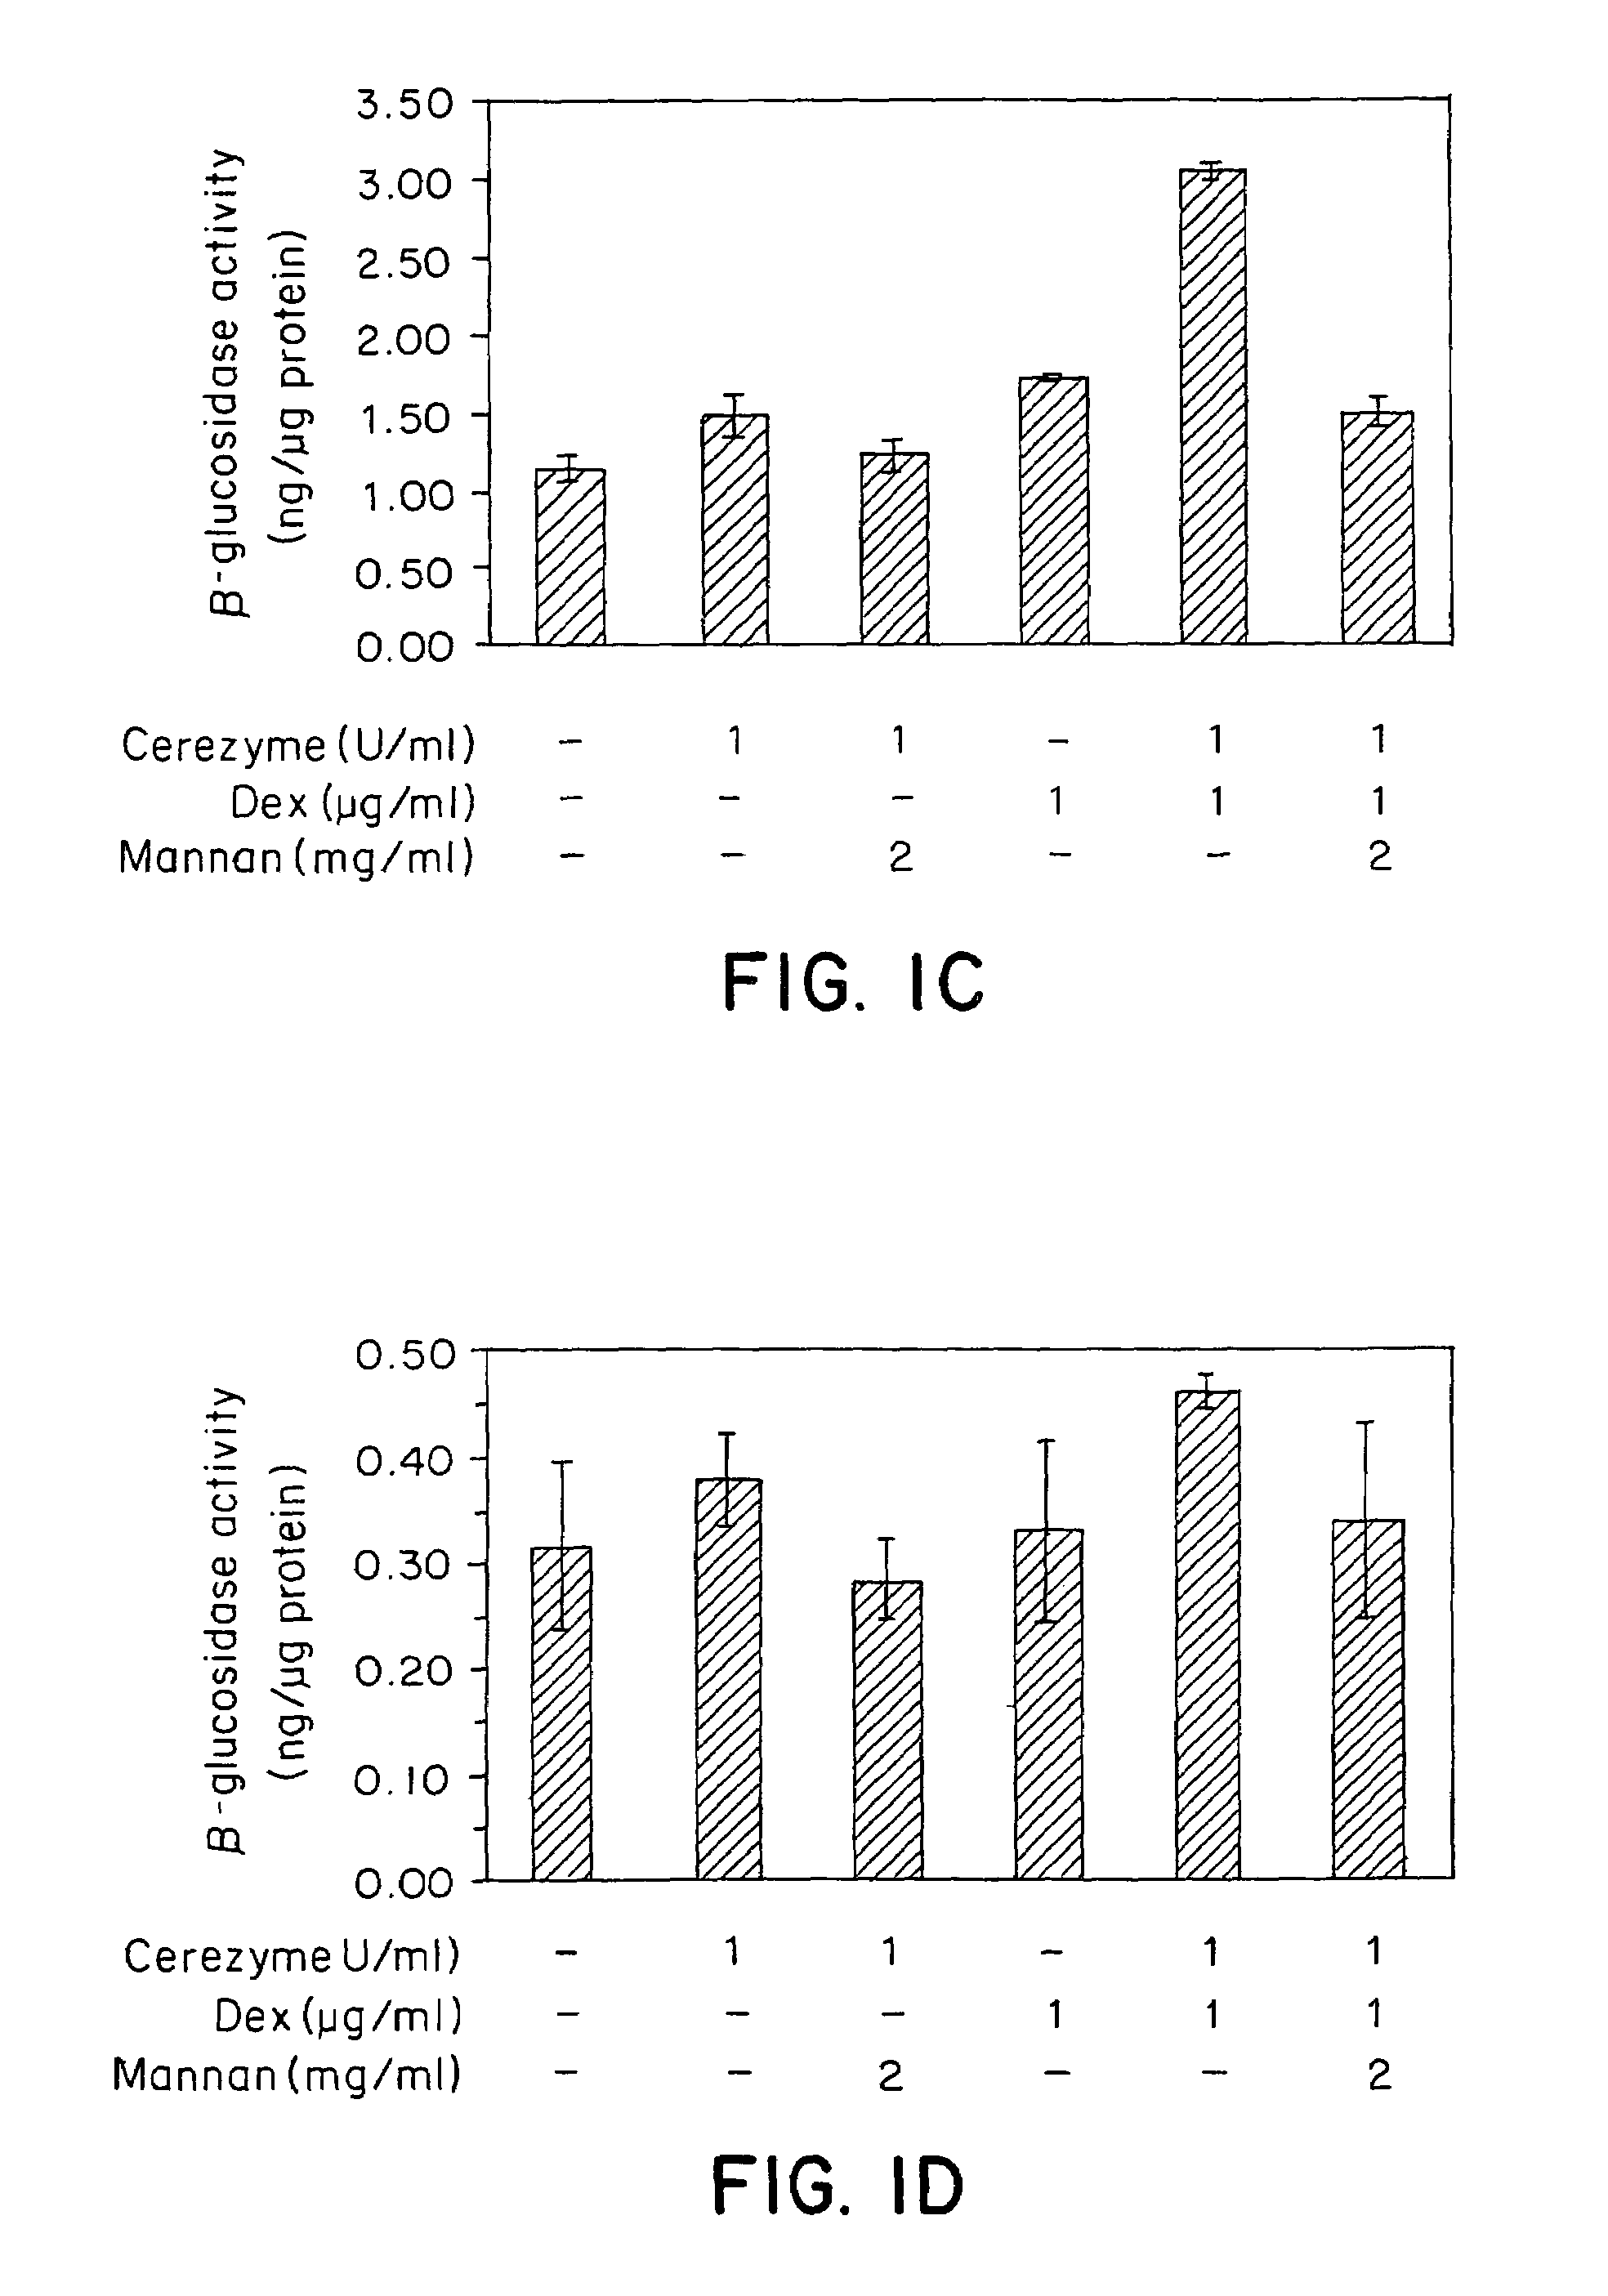 Methods of enhancing lysosomal storage disease therapy by modulation of cell surface receptor density